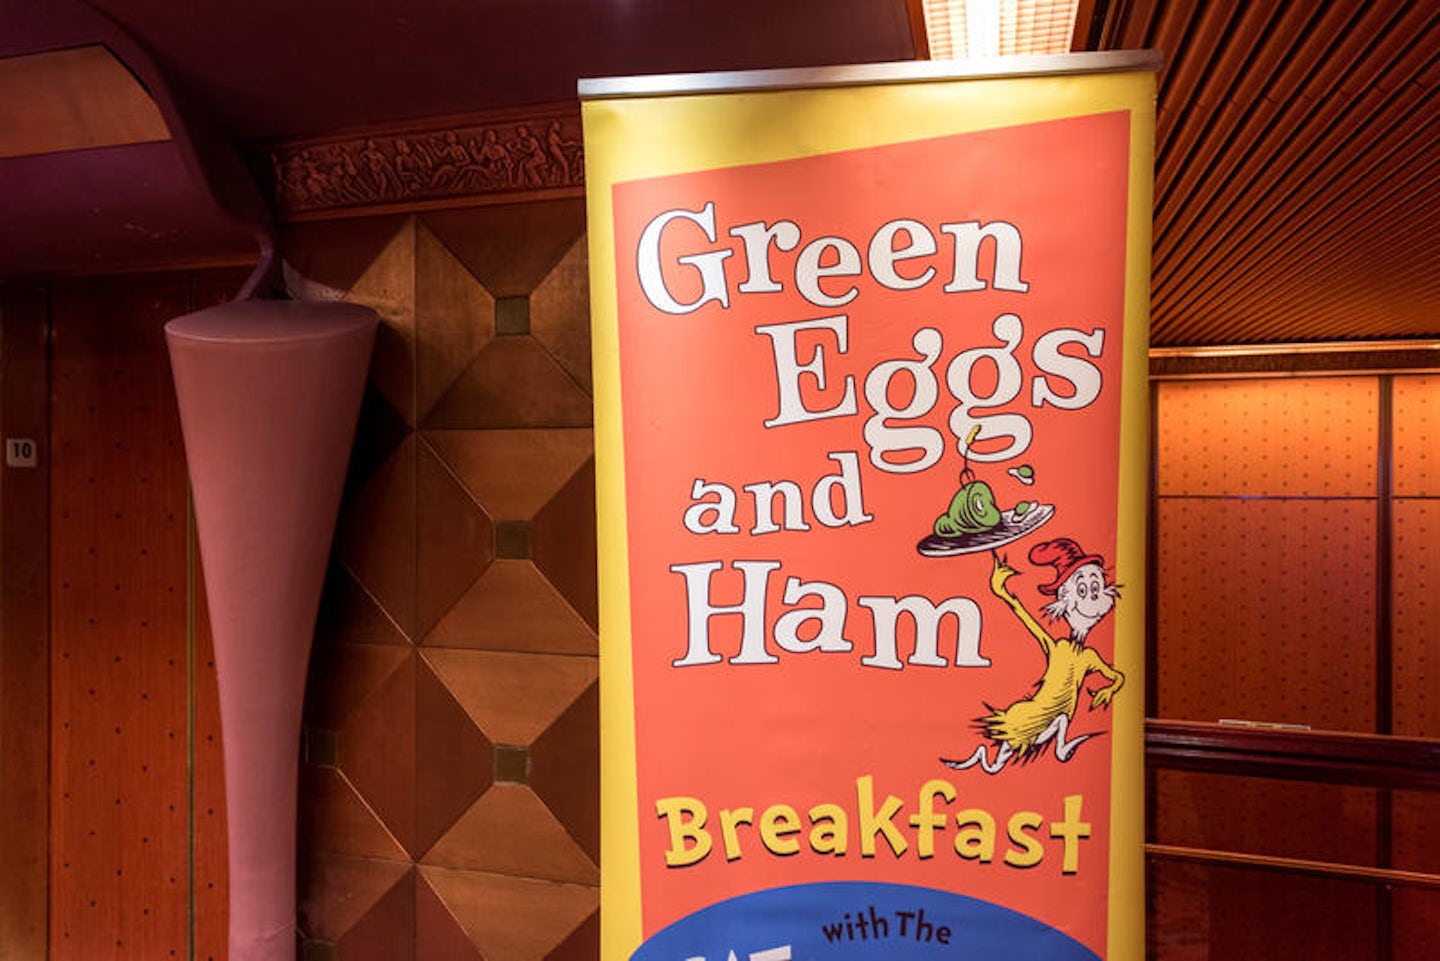 Green Eggs and Breakfast on Carnival Elation